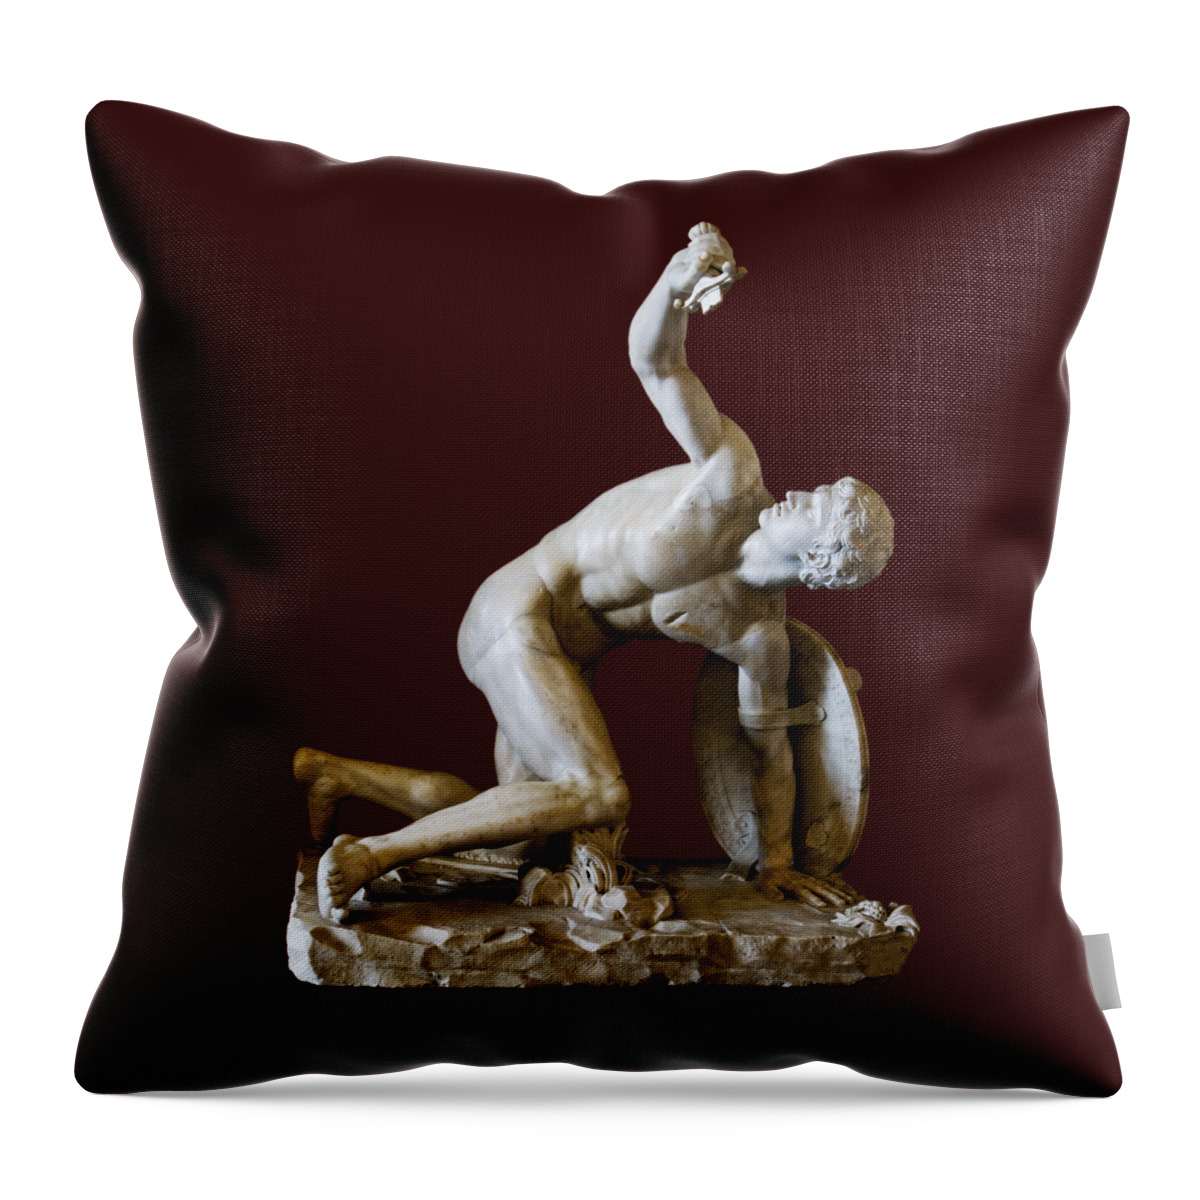 Wounded Warrior Throw Pillow featuring the photograph Wounded Warrior by Weston Westmoreland